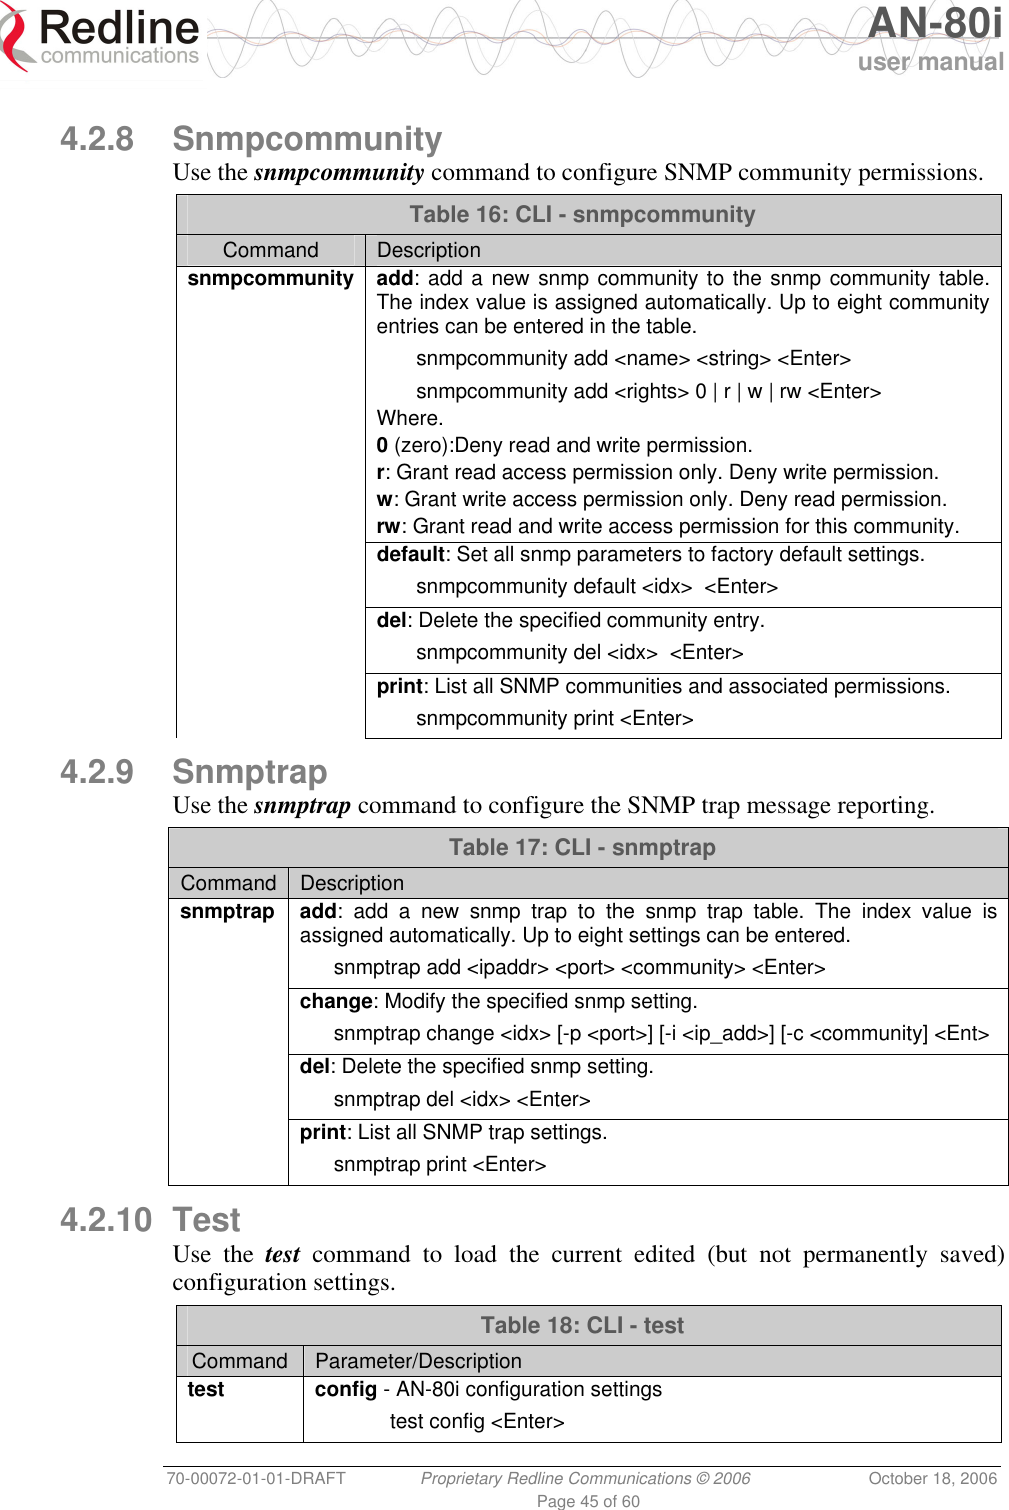   AN-80i user manual 70-00072-01-01-DRAFT  Proprietary Redline Communications © 2006  October 18, 2006 Page 45 of 60  4.2.8 Snmpcommunity Use the snmpcommunity command to configure SNMP community permissions. Table 16: CLI - snmpcommunity Command  Description snmpcommunity add: add a new snmp community to the snmp community table. The index value is assigned automatically. Up to eight community entries can be entered in the table.   snmpcommunity add &lt;name&gt; &lt;string&gt; &lt;Enter&gt;   snmpcommunity add &lt;rights&gt; 0 | r | w | rw &lt;Enter&gt; Where. 0 (zero):Deny read and write permission. r: Grant read access permission only. Deny write permission. w: Grant write access permission only. Deny read permission. rw: Grant read and write access permission for this community.  default: Set all snmp parameters to factory default settings.   snmpcommunity default &lt;idx&gt;  &lt;Enter&gt;  del: Delete the specified community entry.   snmpcommunity del &lt;idx&gt;  &lt;Enter&gt;  print: List all SNMP communities and associated permissions.   snmpcommunity print &lt;Enter&gt; 4.2.9 Snmptrap Use the snmptrap command to configure the SNMP trap message reporting. Table 17: CLI - snmptrap Command  Description snmptrap add: add a new snmp trap to the snmp trap table. The index value is assigned automatically. Up to eight settings can be entered.   snmptrap add &lt;ipaddr&gt; &lt;port&gt; &lt;community&gt; &lt;Enter&gt;  change: Modify the specified snmp setting.   snmptrap change &lt;idx&gt; [-p &lt;port&gt;] [-i &lt;ip_add&gt;] [-c &lt;community] &lt;Ent&gt;  del: Delete the specified snmp setting.    snmptrap del &lt;idx&gt; &lt;Enter&gt;  print: List all SNMP trap settings.    snmptrap print &lt;Enter&gt;  4.2.10 Test Use the test command to load the current edited (but not permanently saved) configuration settings.  Table 18: CLI - test Command  Parameter/Description test config - AN-80i configuration settings  test config &lt;Enter&gt;  